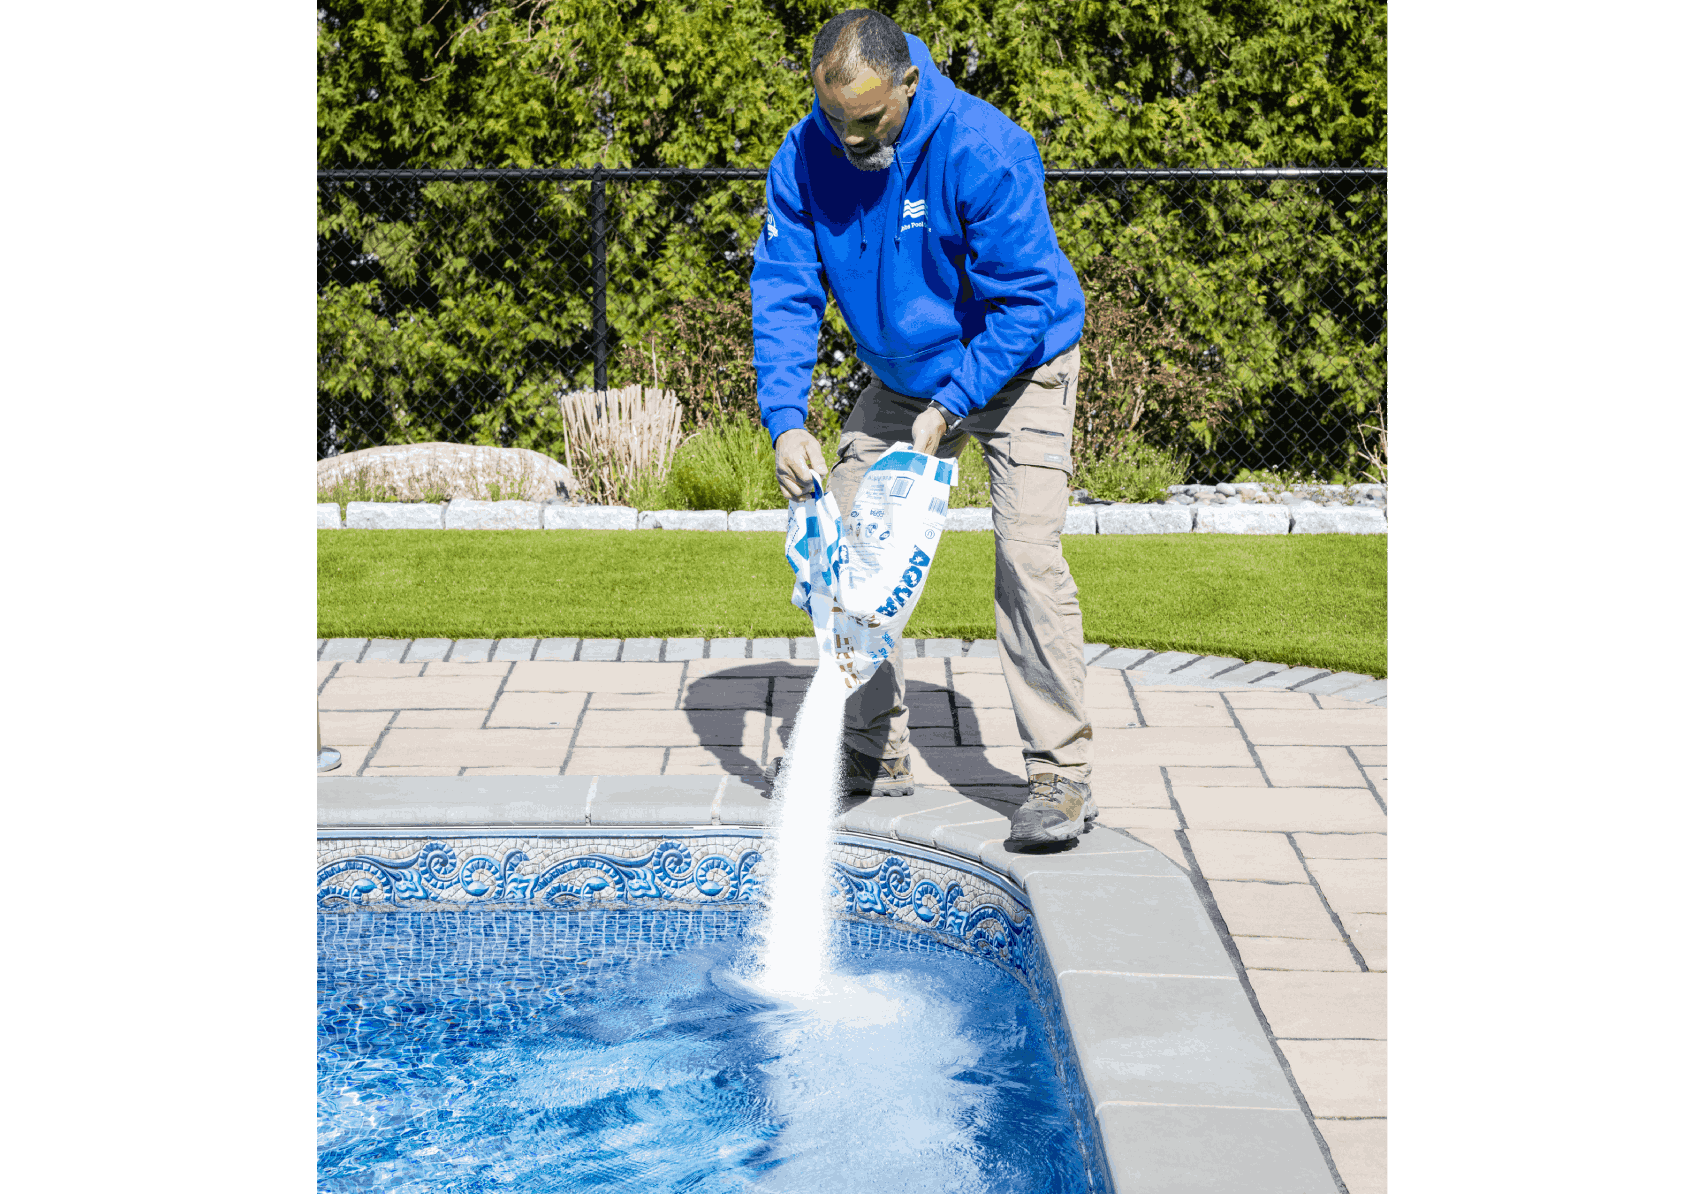 A man in blue jacket pouring water into pool.